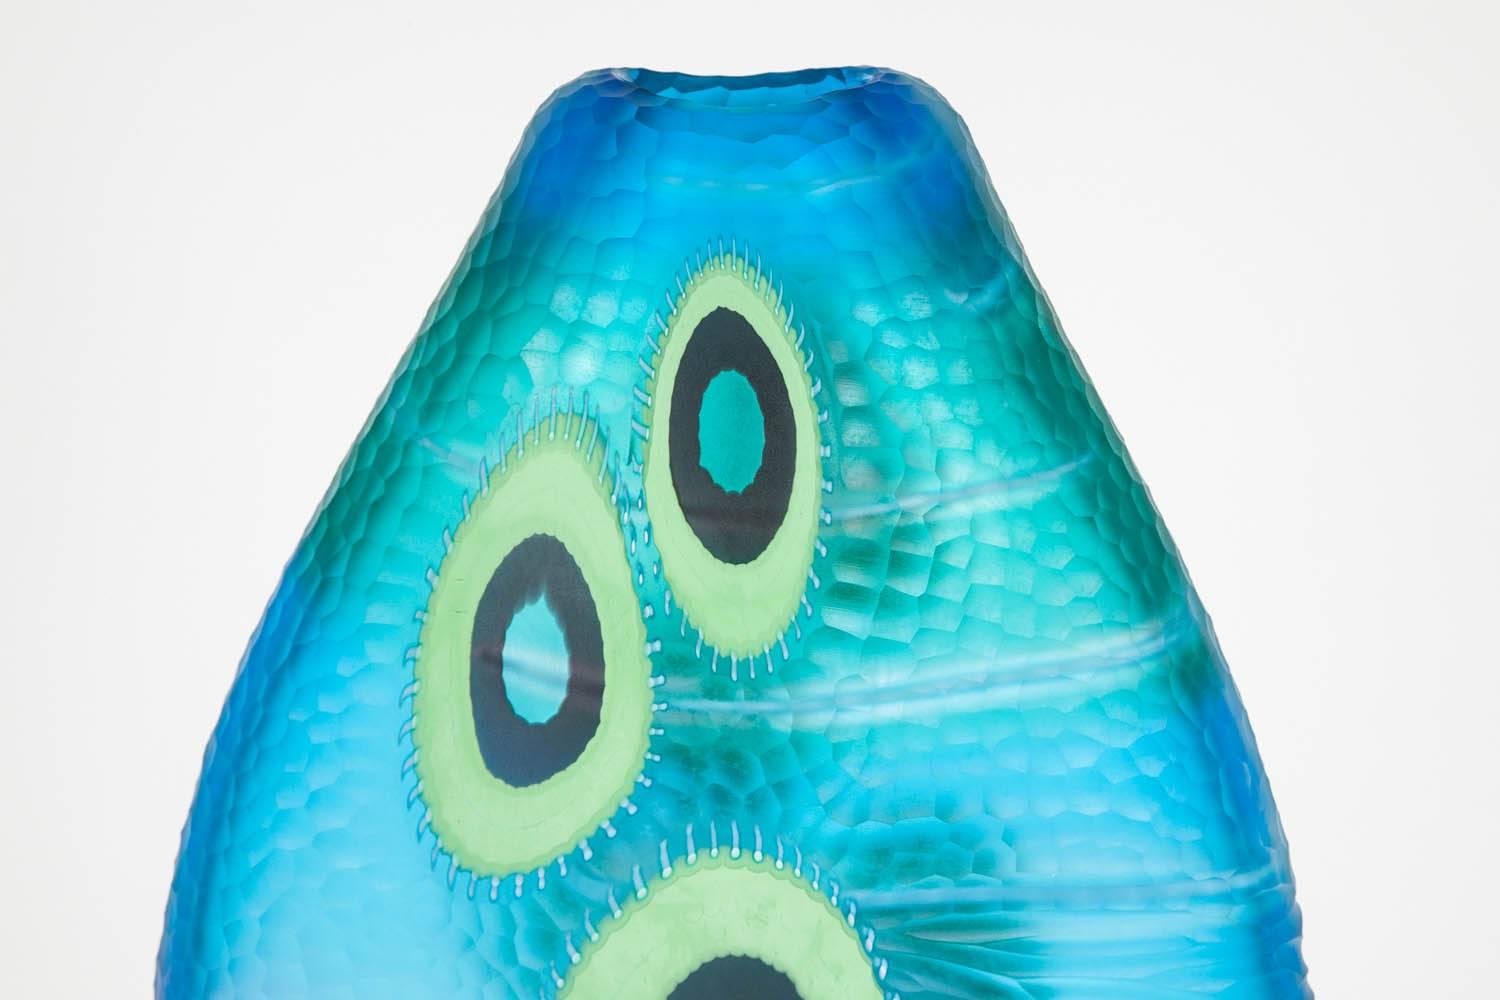 Eviva III is a contemporary handblown, sculpted glass vase with 'battuto' style cutting, in mint, aubergine, blue and turquoise, created by the Italian bothers and artists, Mattia and Marco Salvadore.

Mattia and Marco Salvadore began working